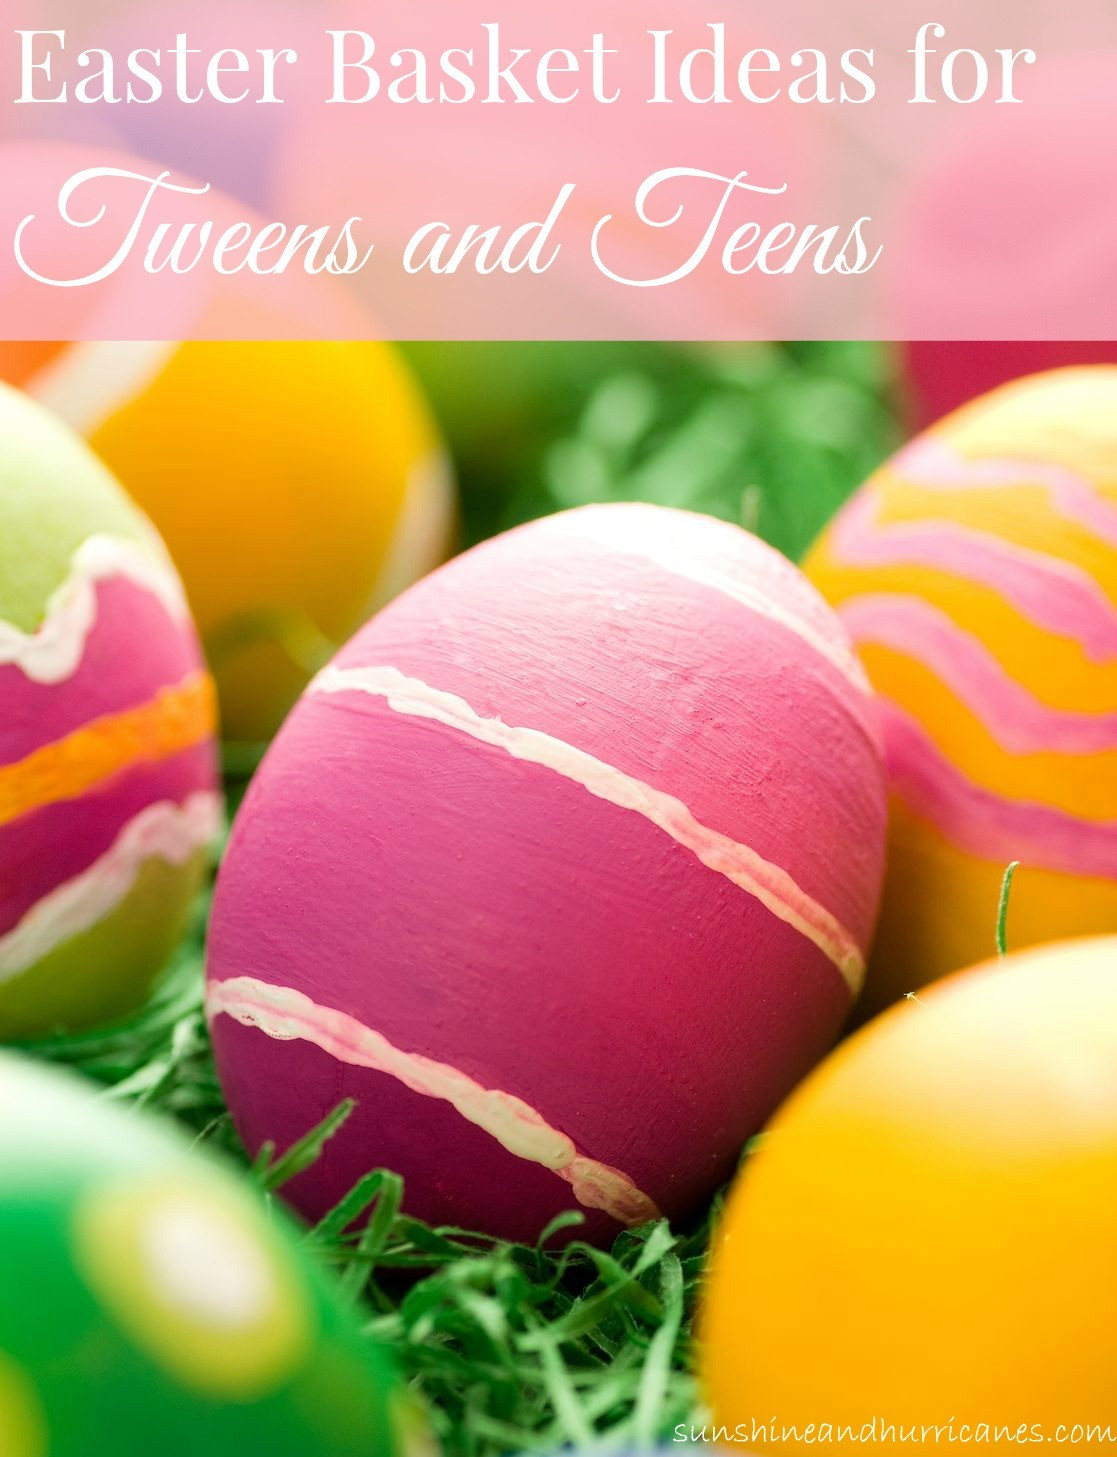 Easter Ideas For Teens
 Easter Basket Ideas For Tweens and Teens Sunshine and